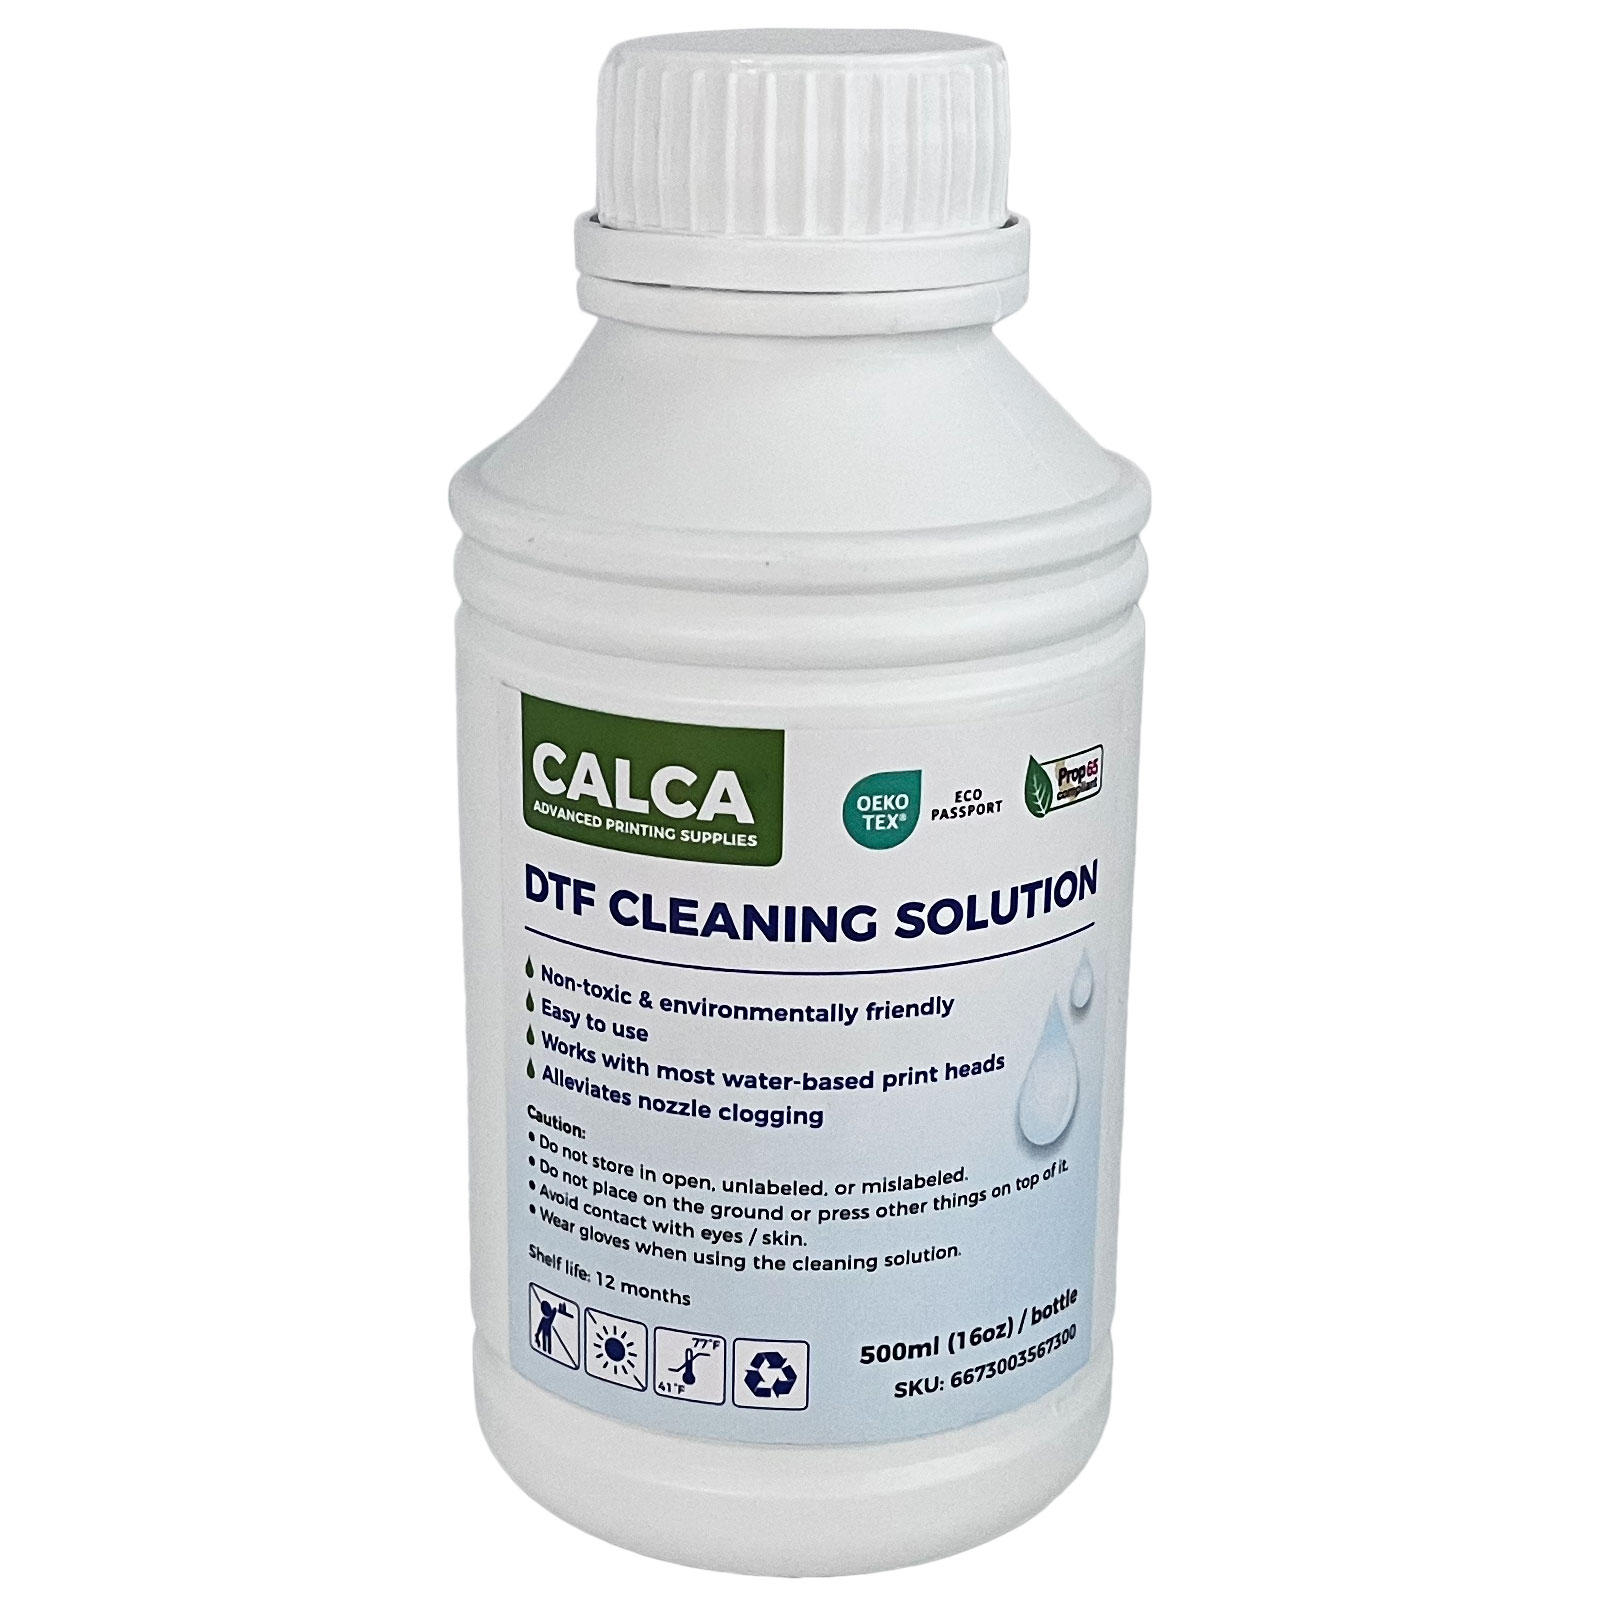 CALCA Direct to Transfer Film Cleaning Solution for Water-based Epson Printheads. 16 oz, Bottle of 500ml